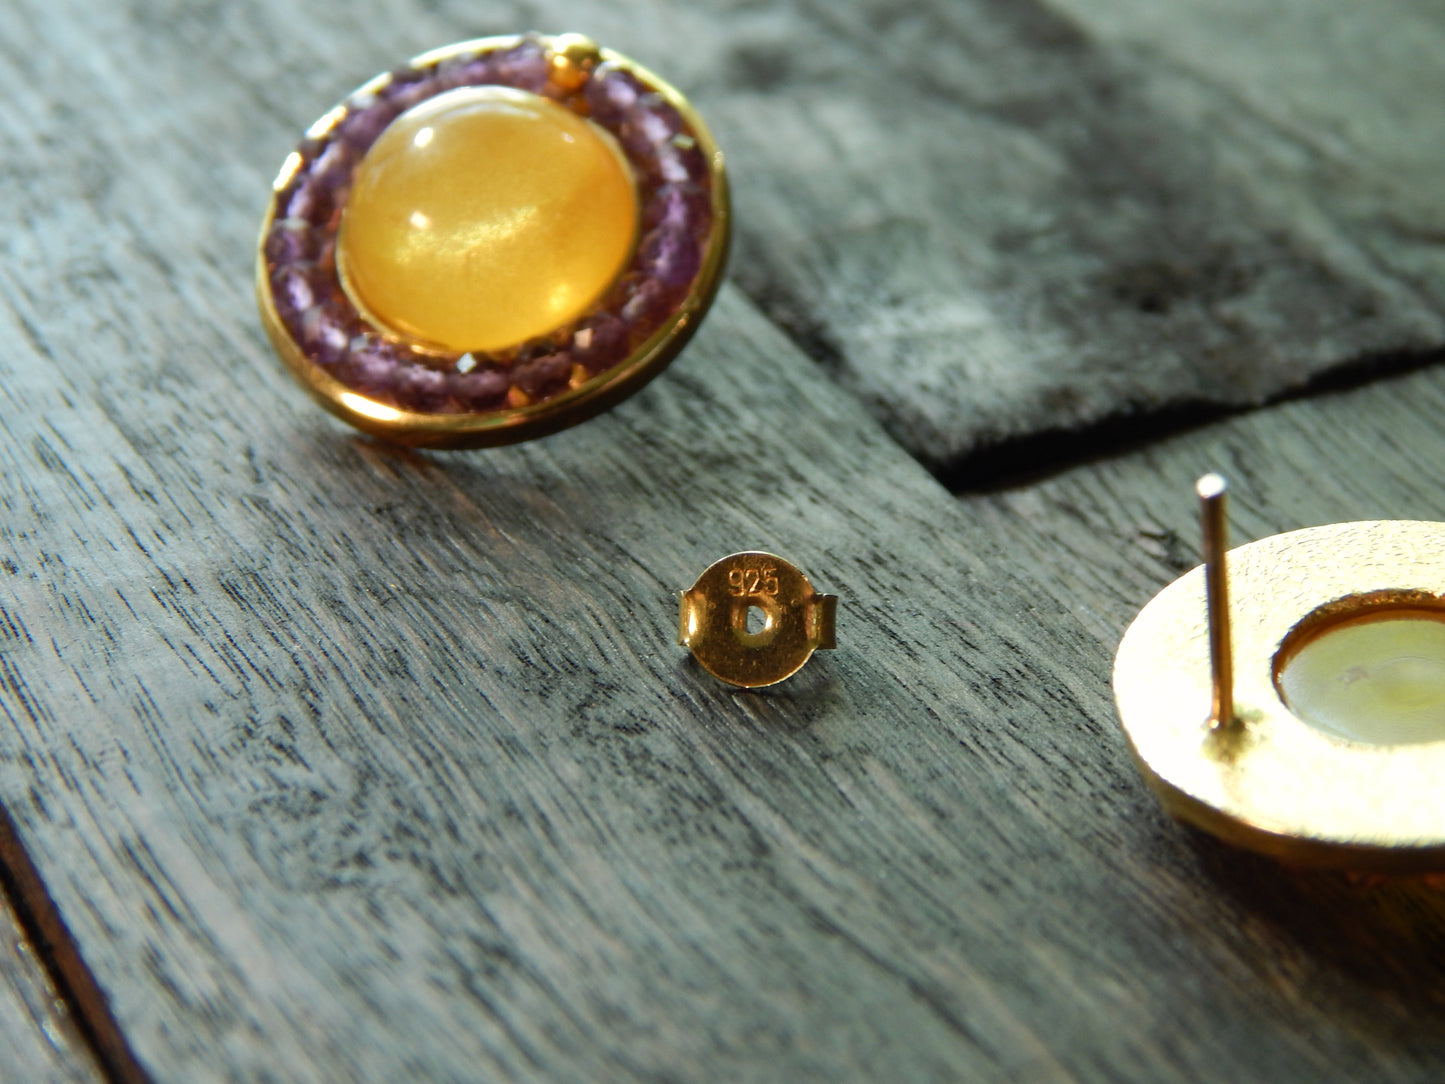 14K Gold Plated Natural Baltic Butterscotch Amber and Purple Amethyst Earrings